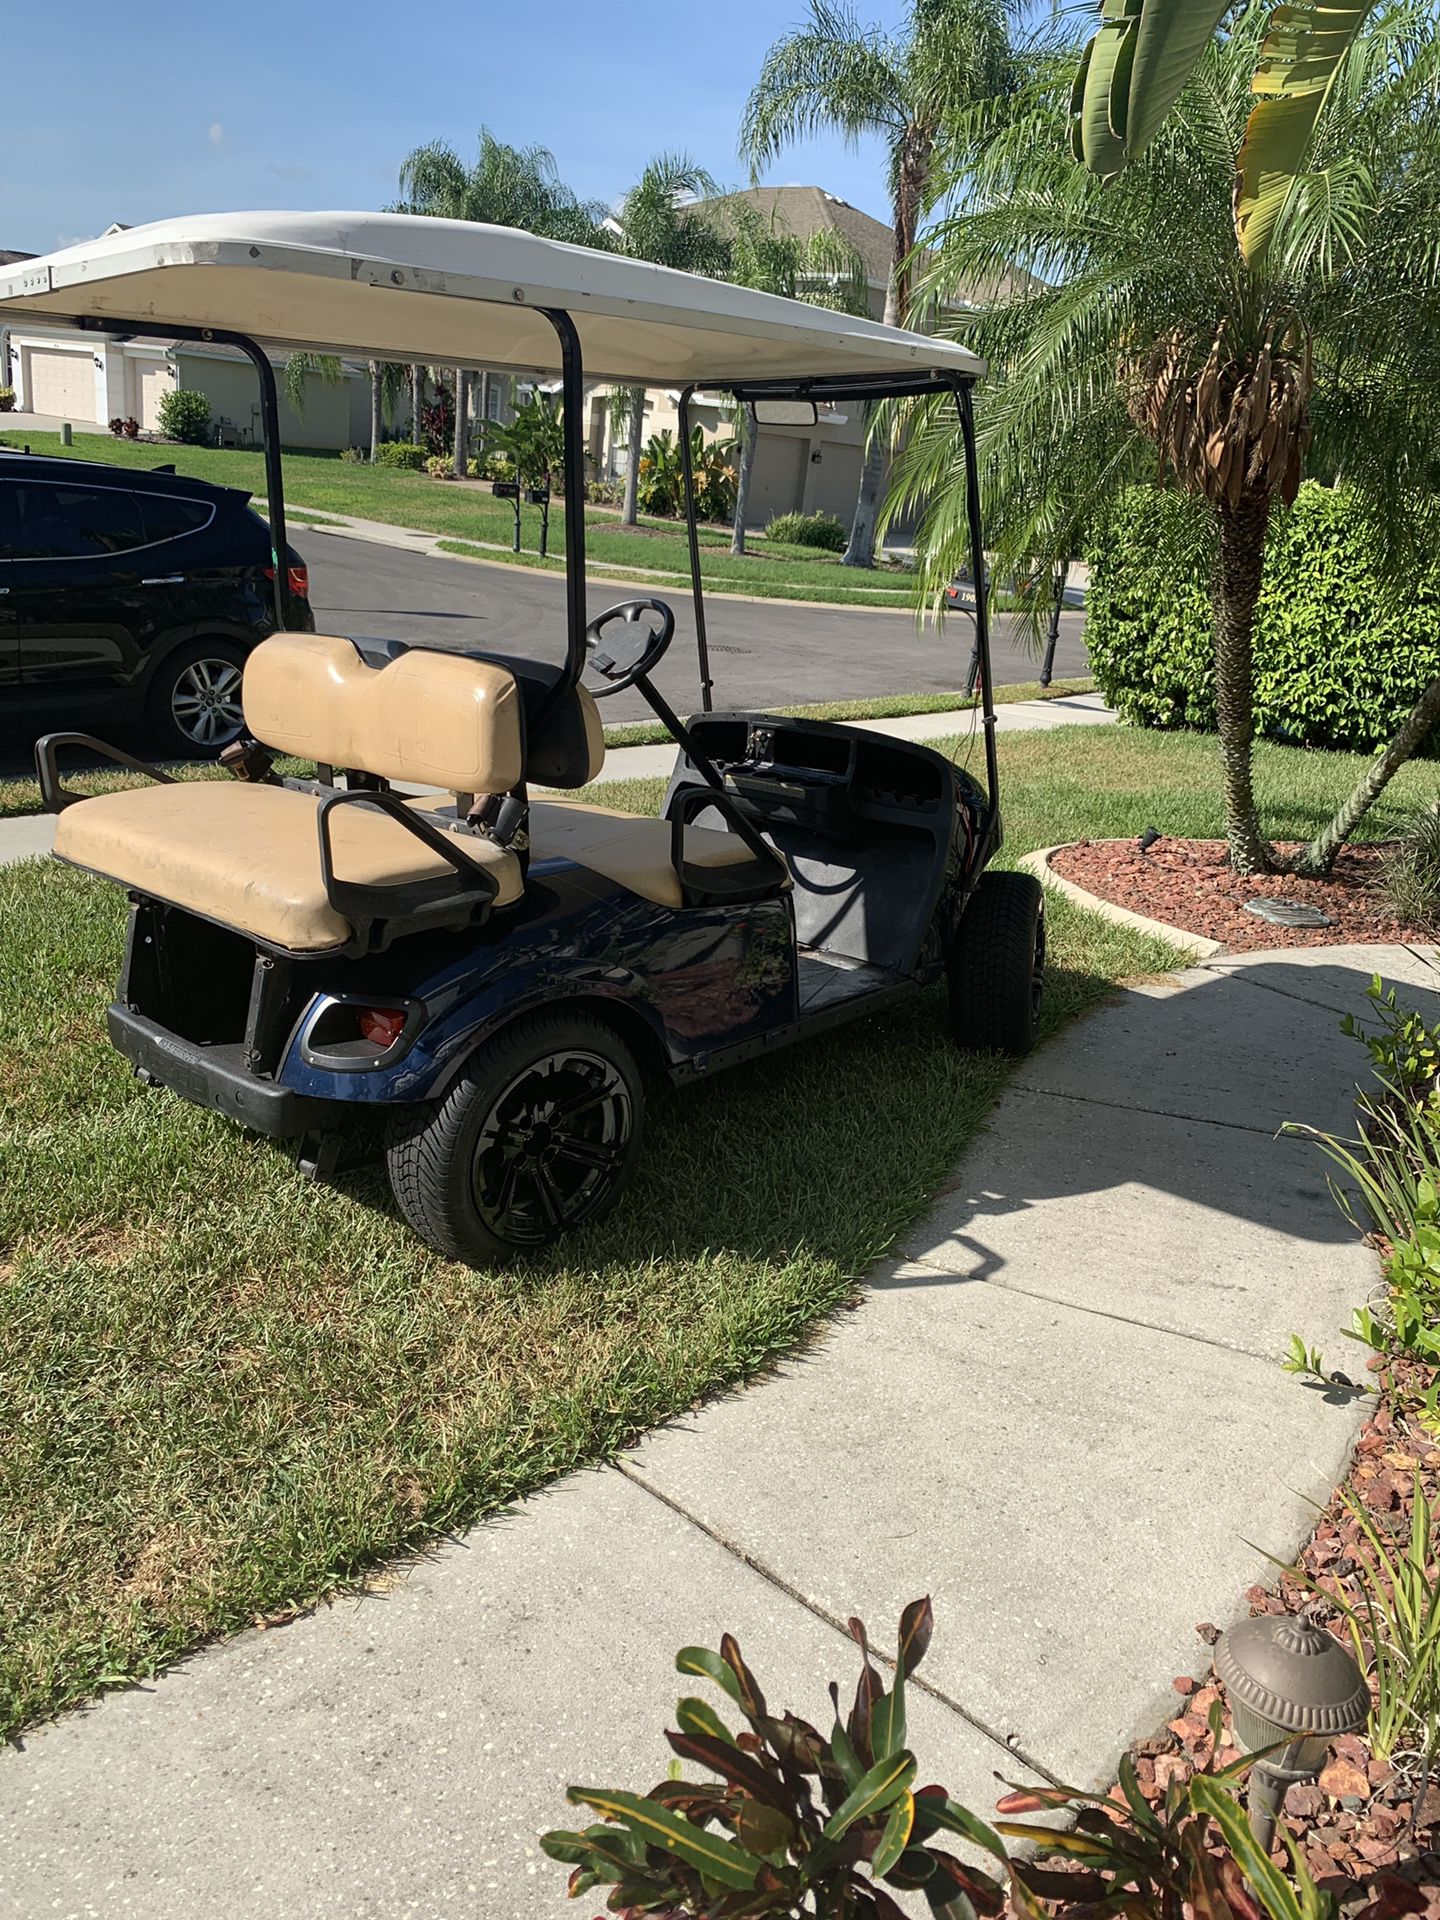 2014 EZGO 48v TXT 1 year old Trojan batteries. Brand new 48v to 12v wired in to run the light bar and the brand new LED headlight and taillights. Bra